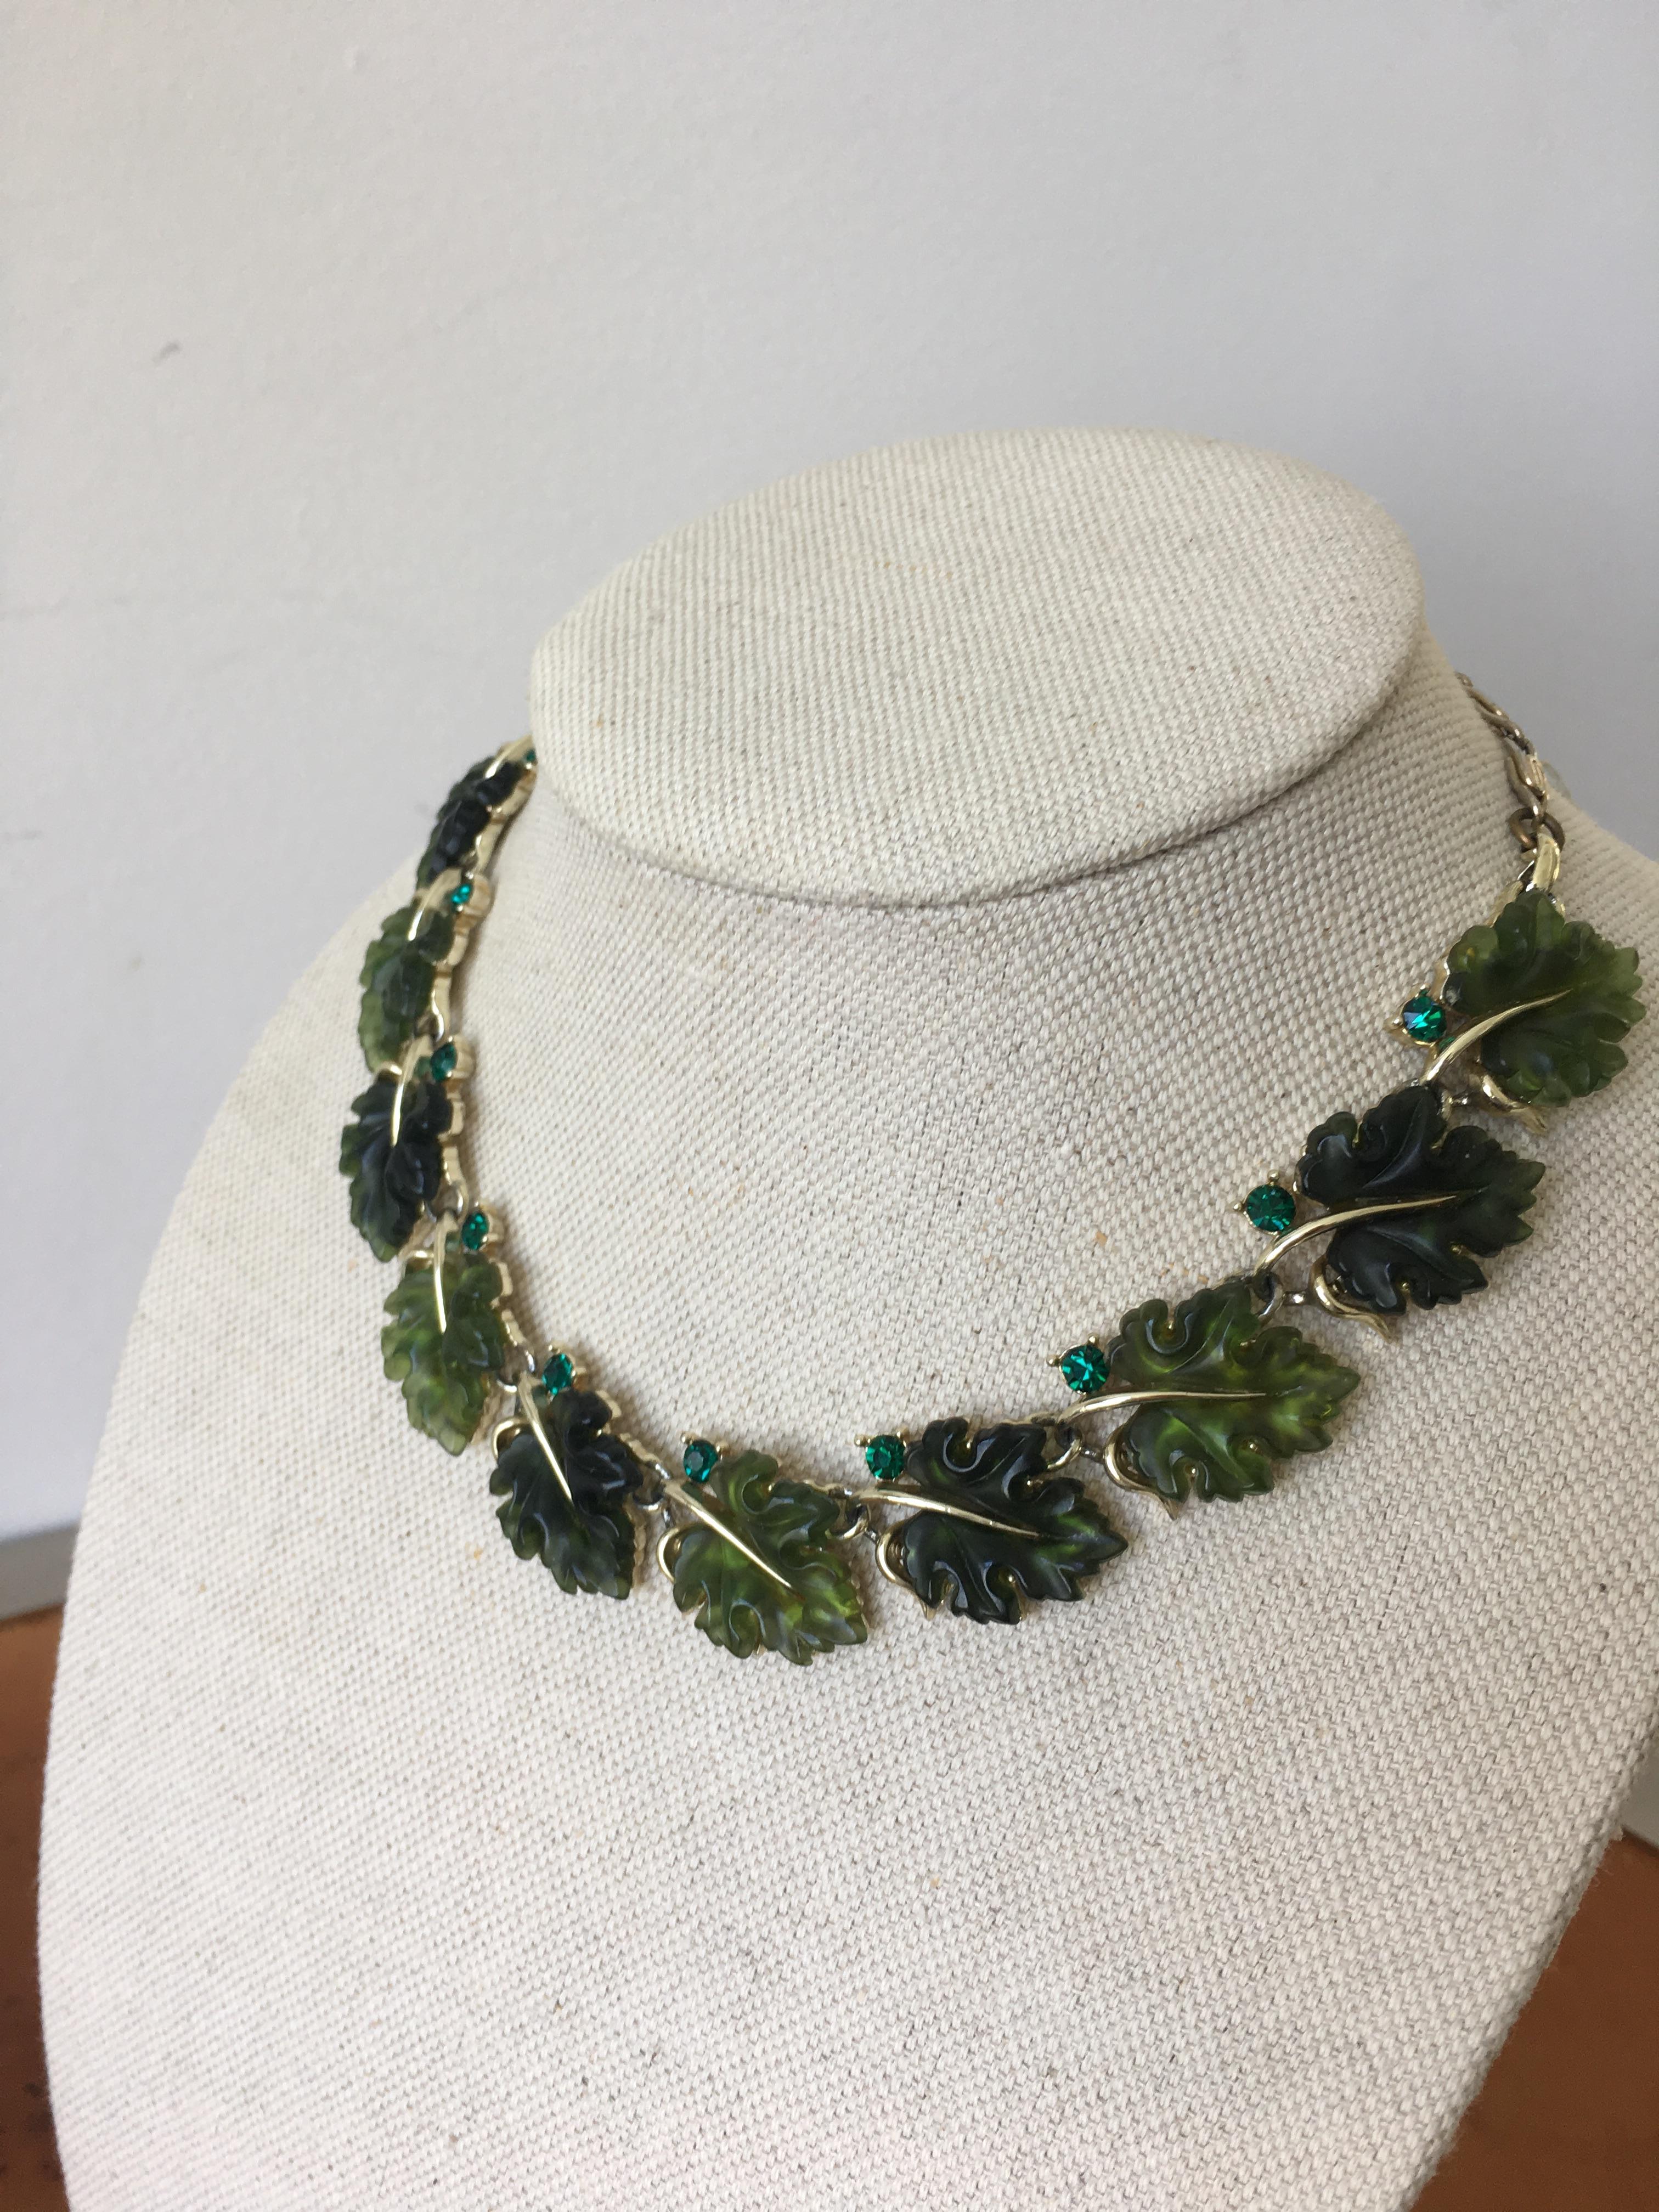 Vintage emerald oak leaf necklace by Lisner, 1960s

Currently, one of the most coveted vintage Lisner lines is the molded plastic oak-leaf jewelry, which was only produced for five years in the 1960s.

Classic Lisner Lucite necklace. Featuring